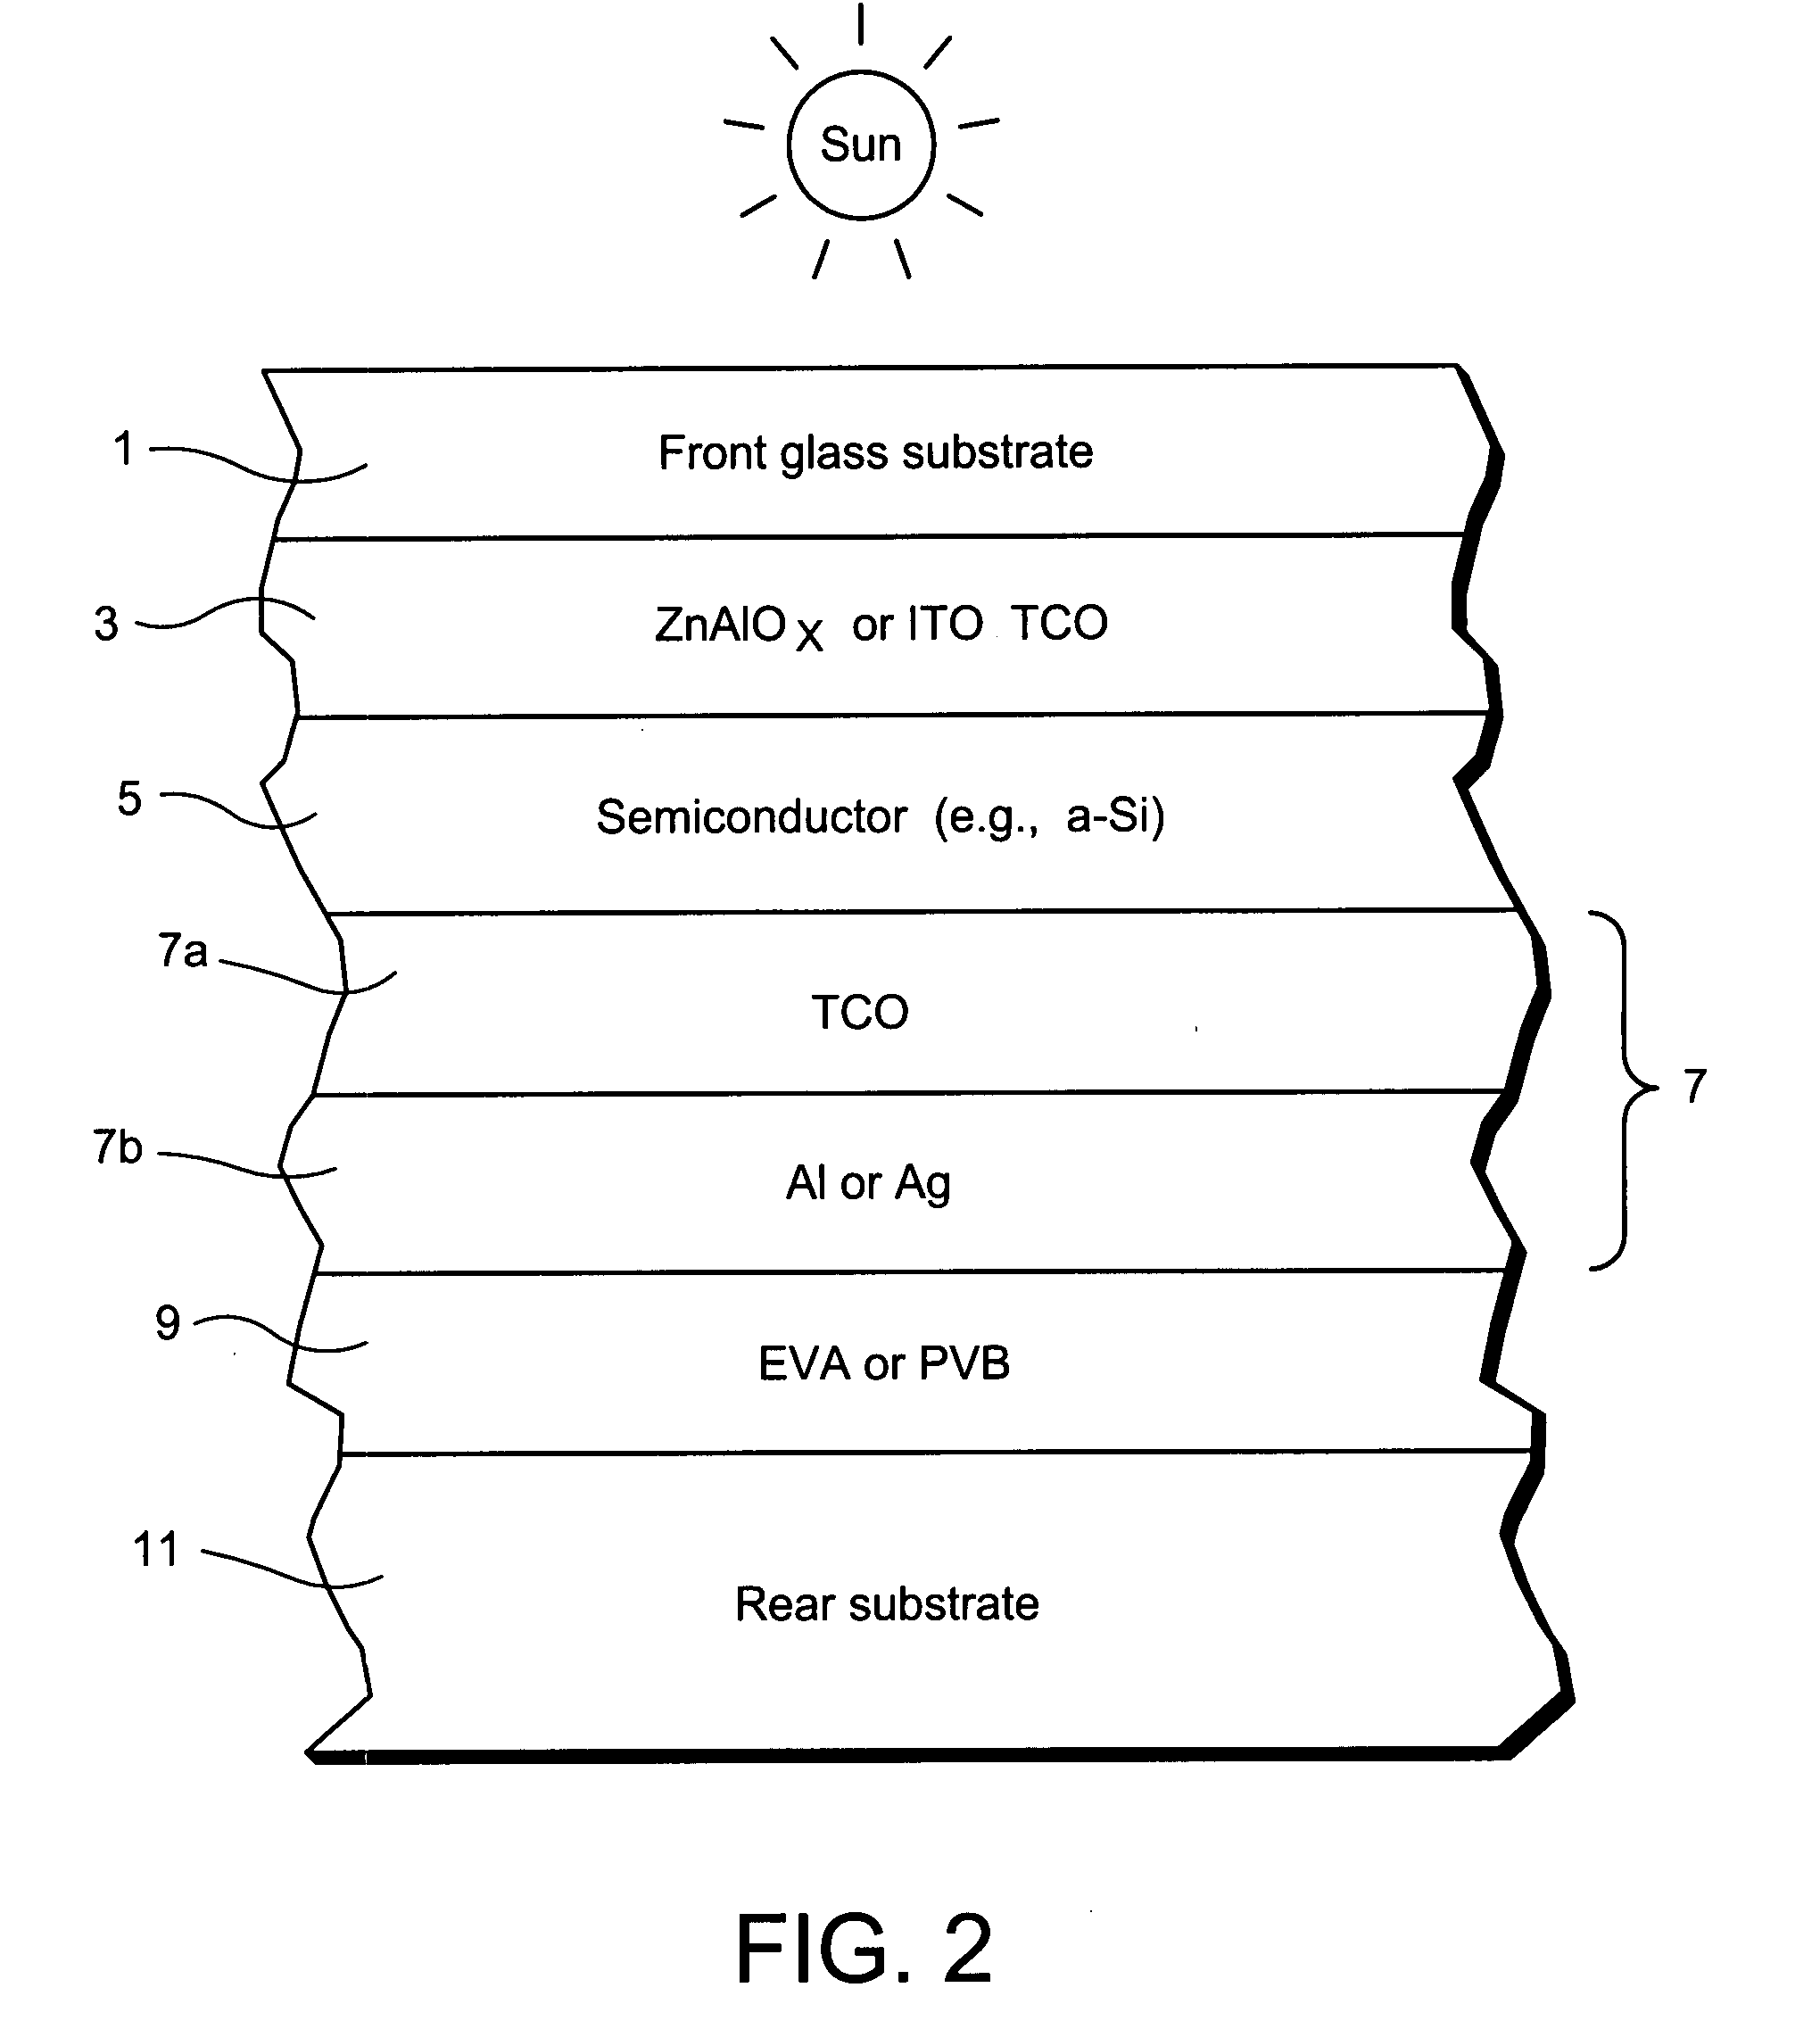 Method of making TCO front electrode for use in photovoltaic device or the like